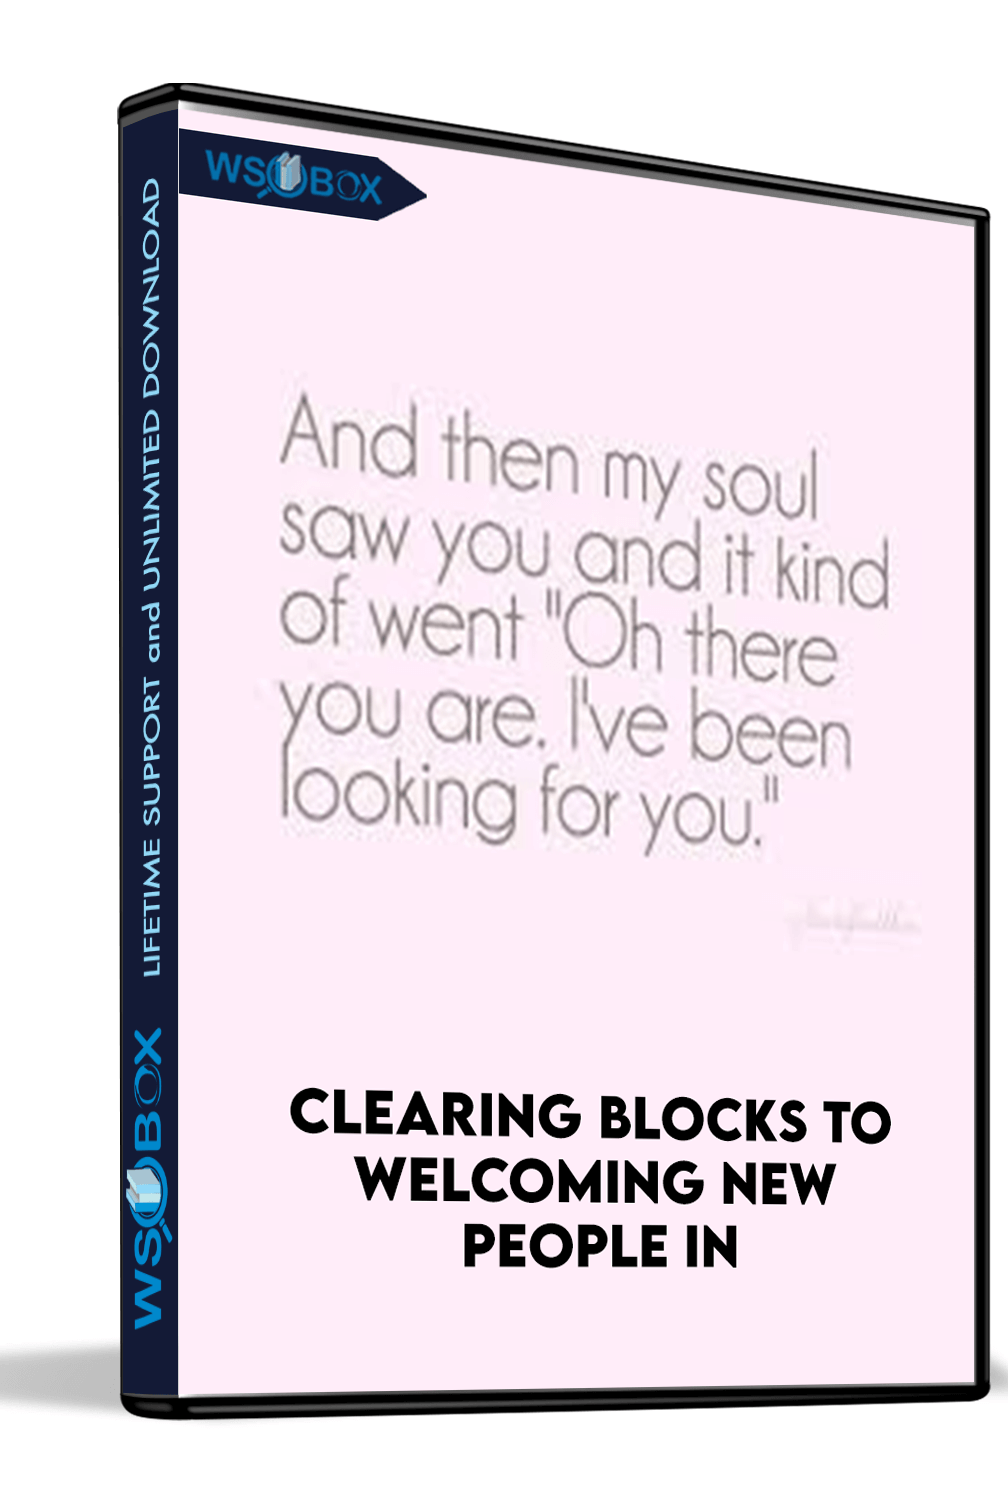 Clearing Blocks to Welcoming New People In